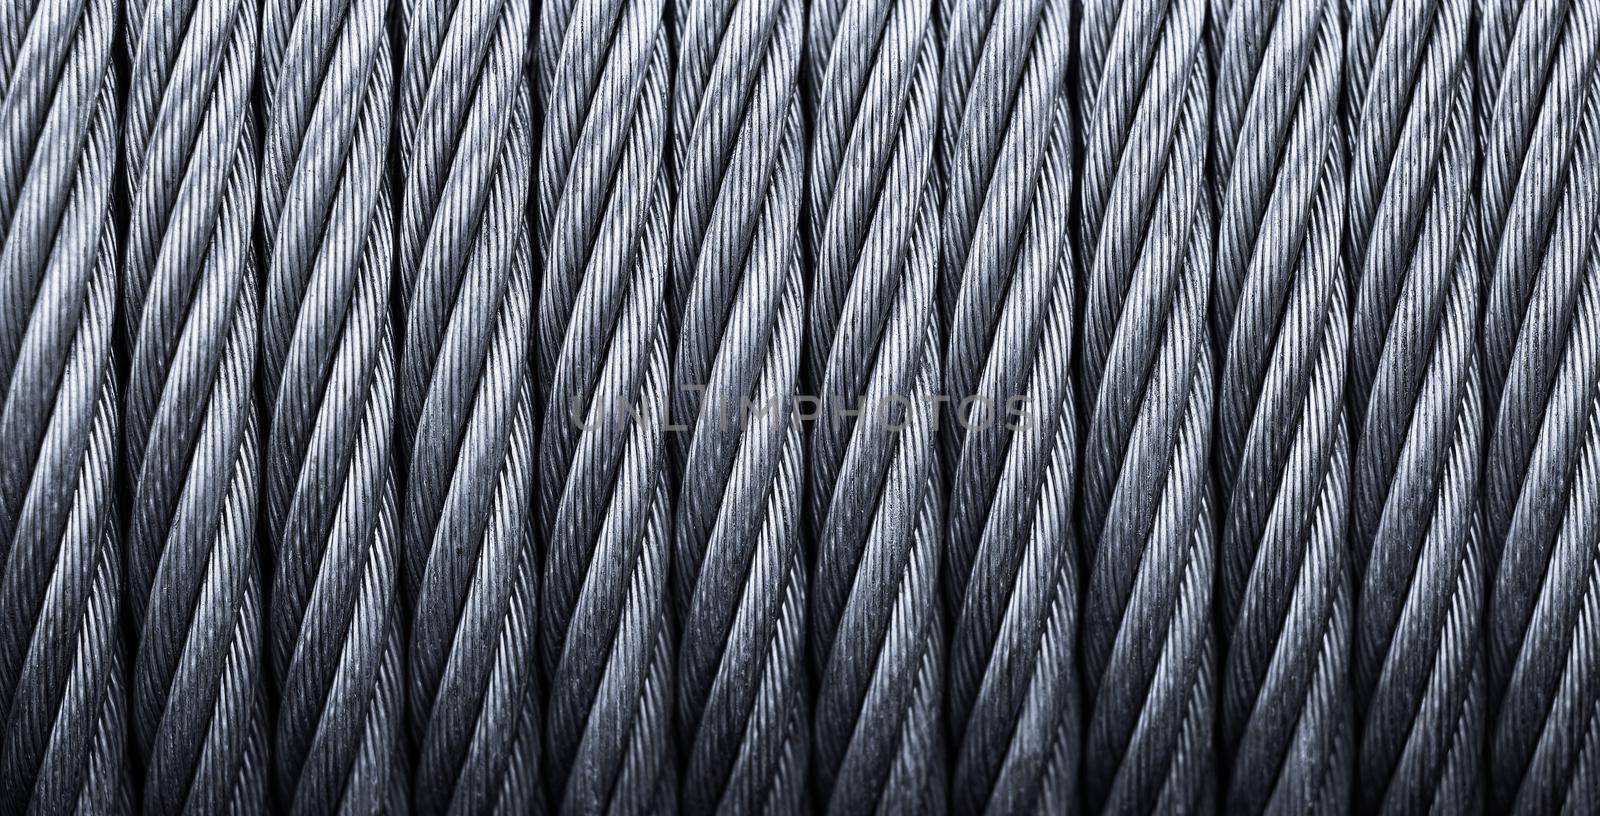 Metal cable winch. Steel rope winch close-up. Strong still background by EvgeniyQW